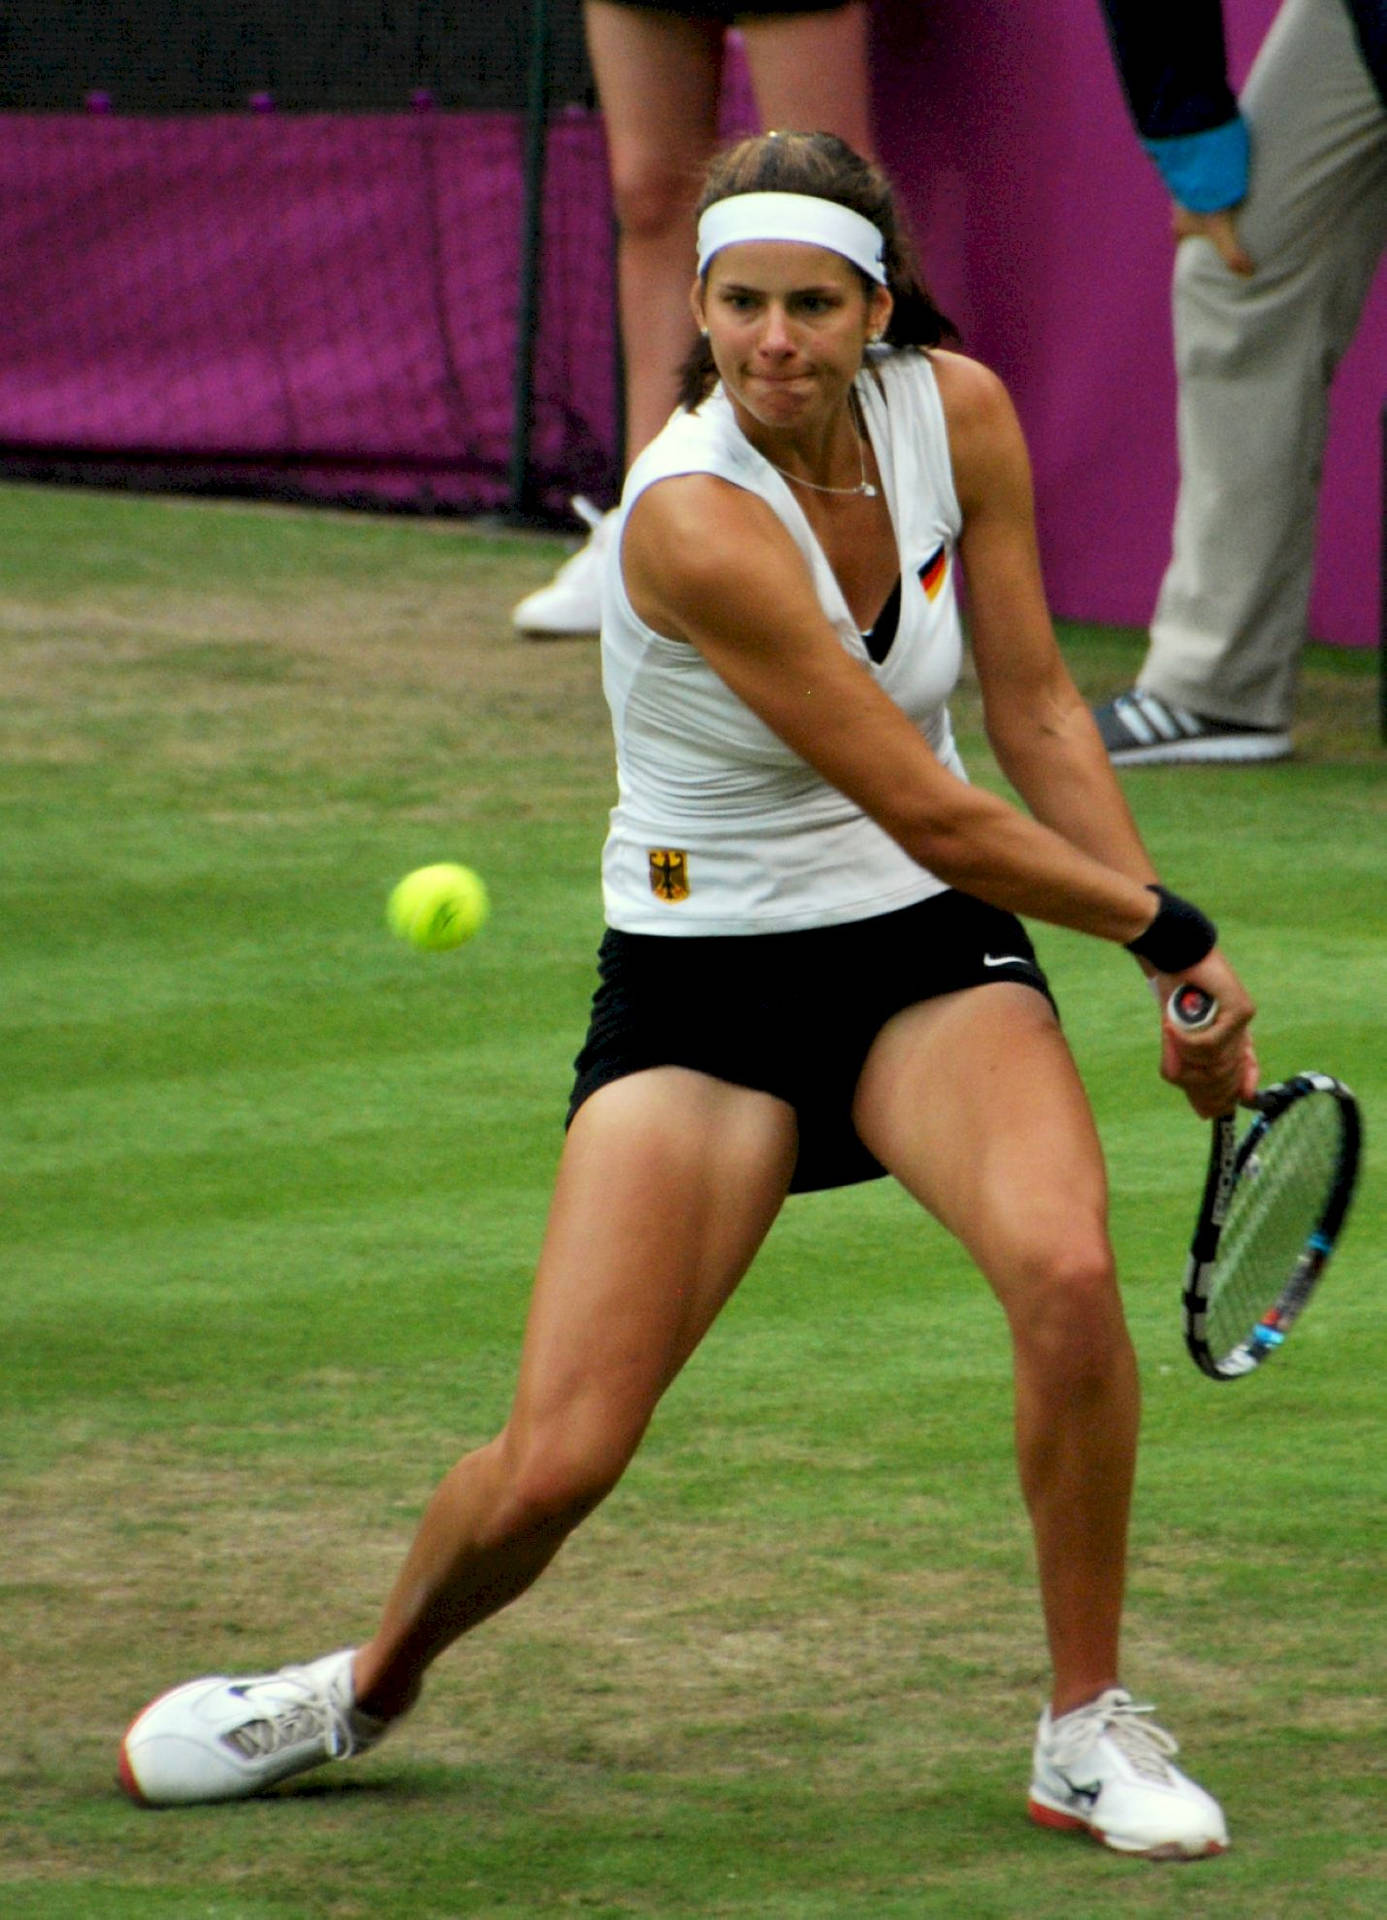 Julia Goerges in action during a tennis match Wallpaper